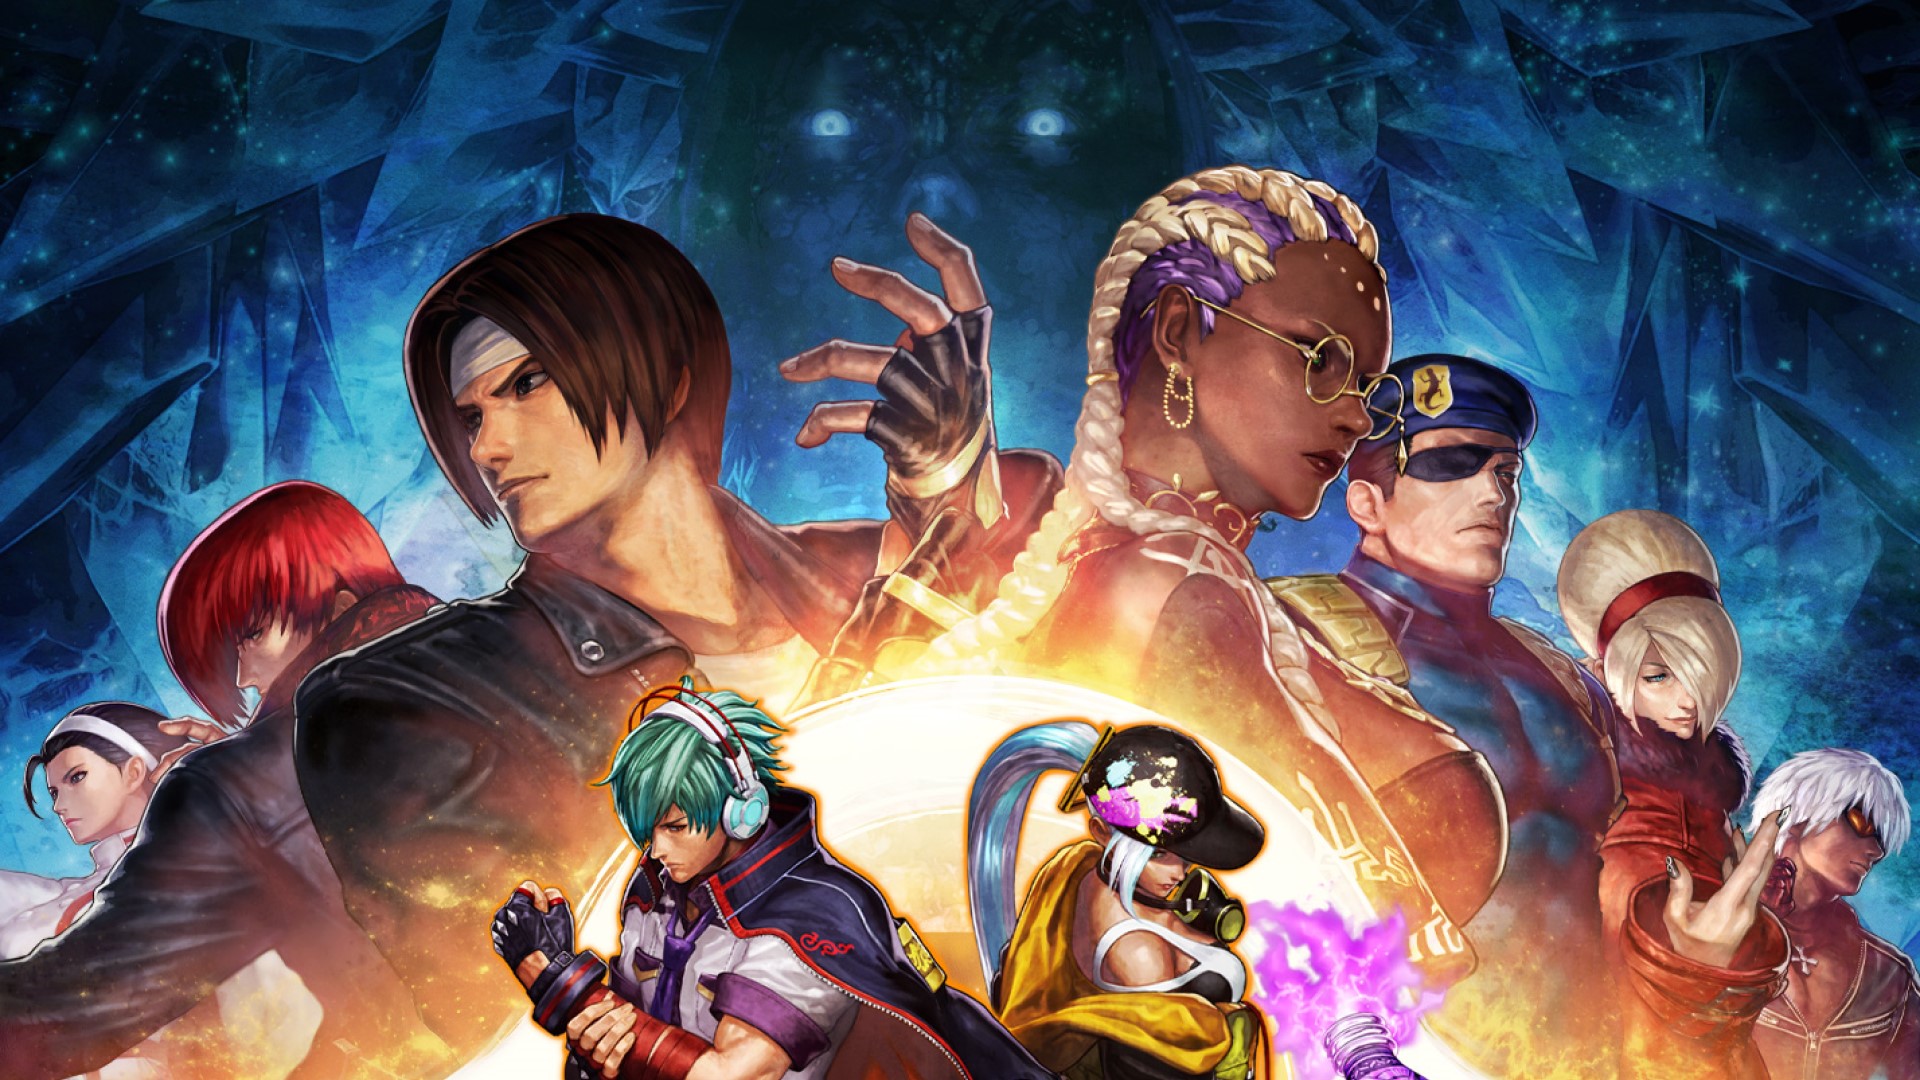 The King of Fighters XV - Download